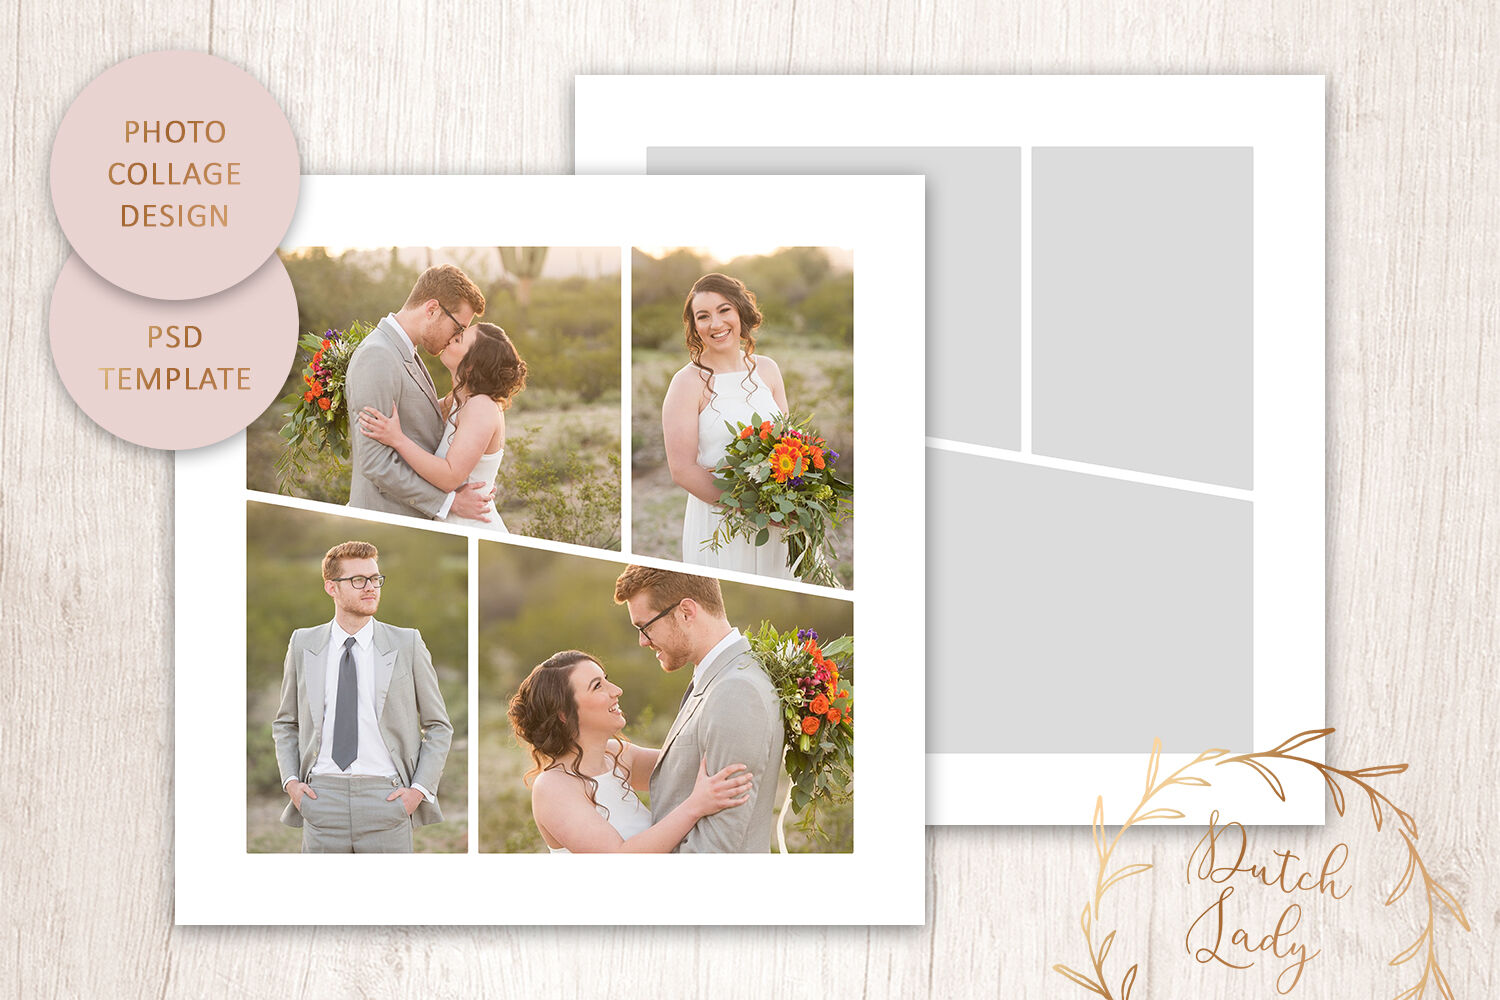 PSD Photo Collage Template #5 By The Dutch Lady Designs TheHungryJPEG